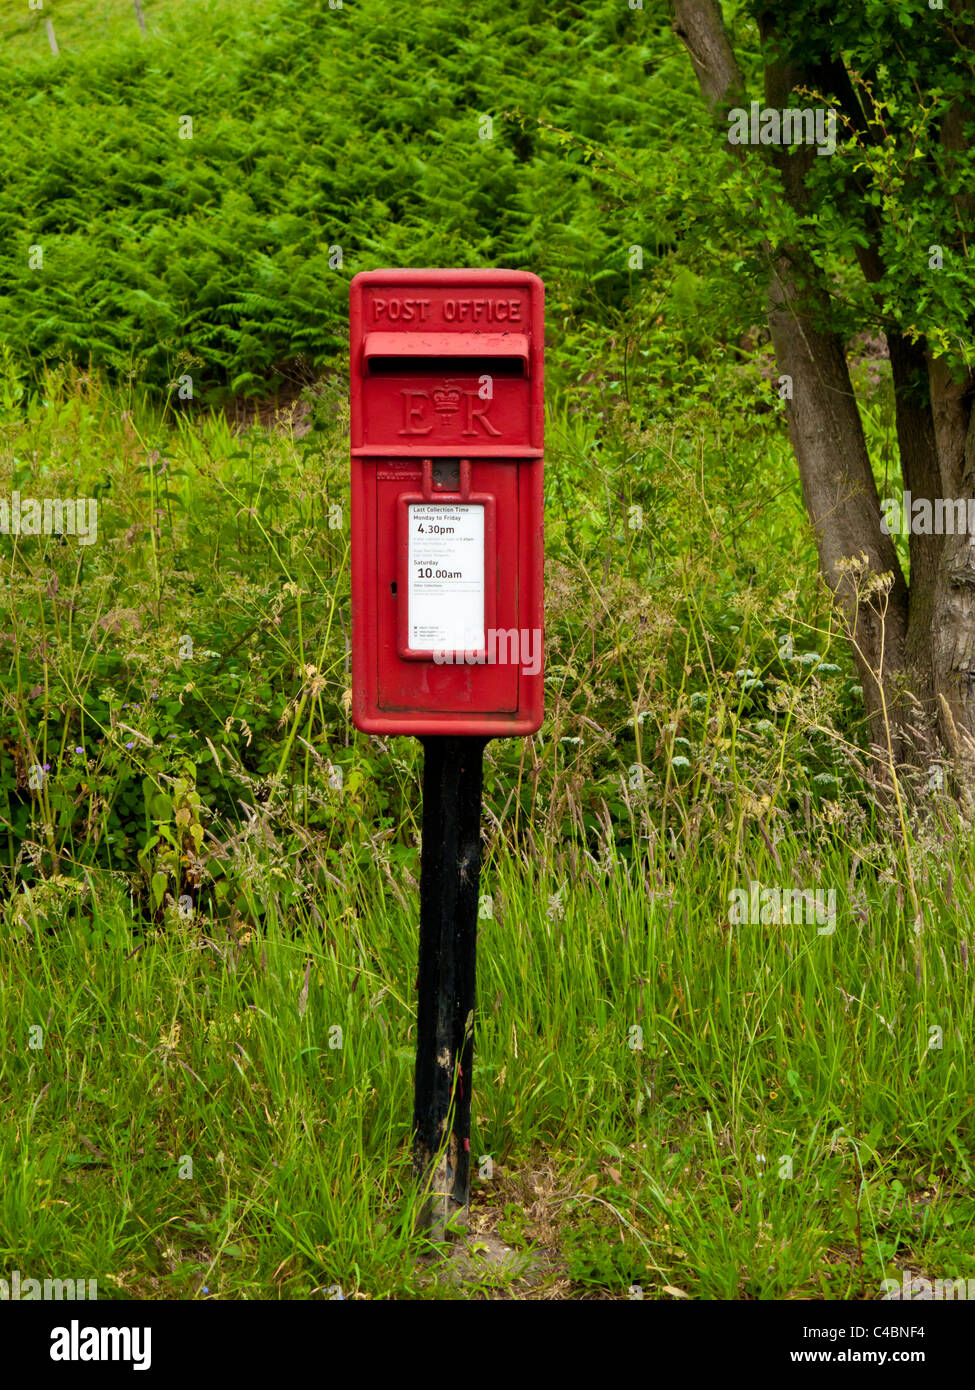 Post box in rural area near Petworth, west sussex, England. Stock Photo